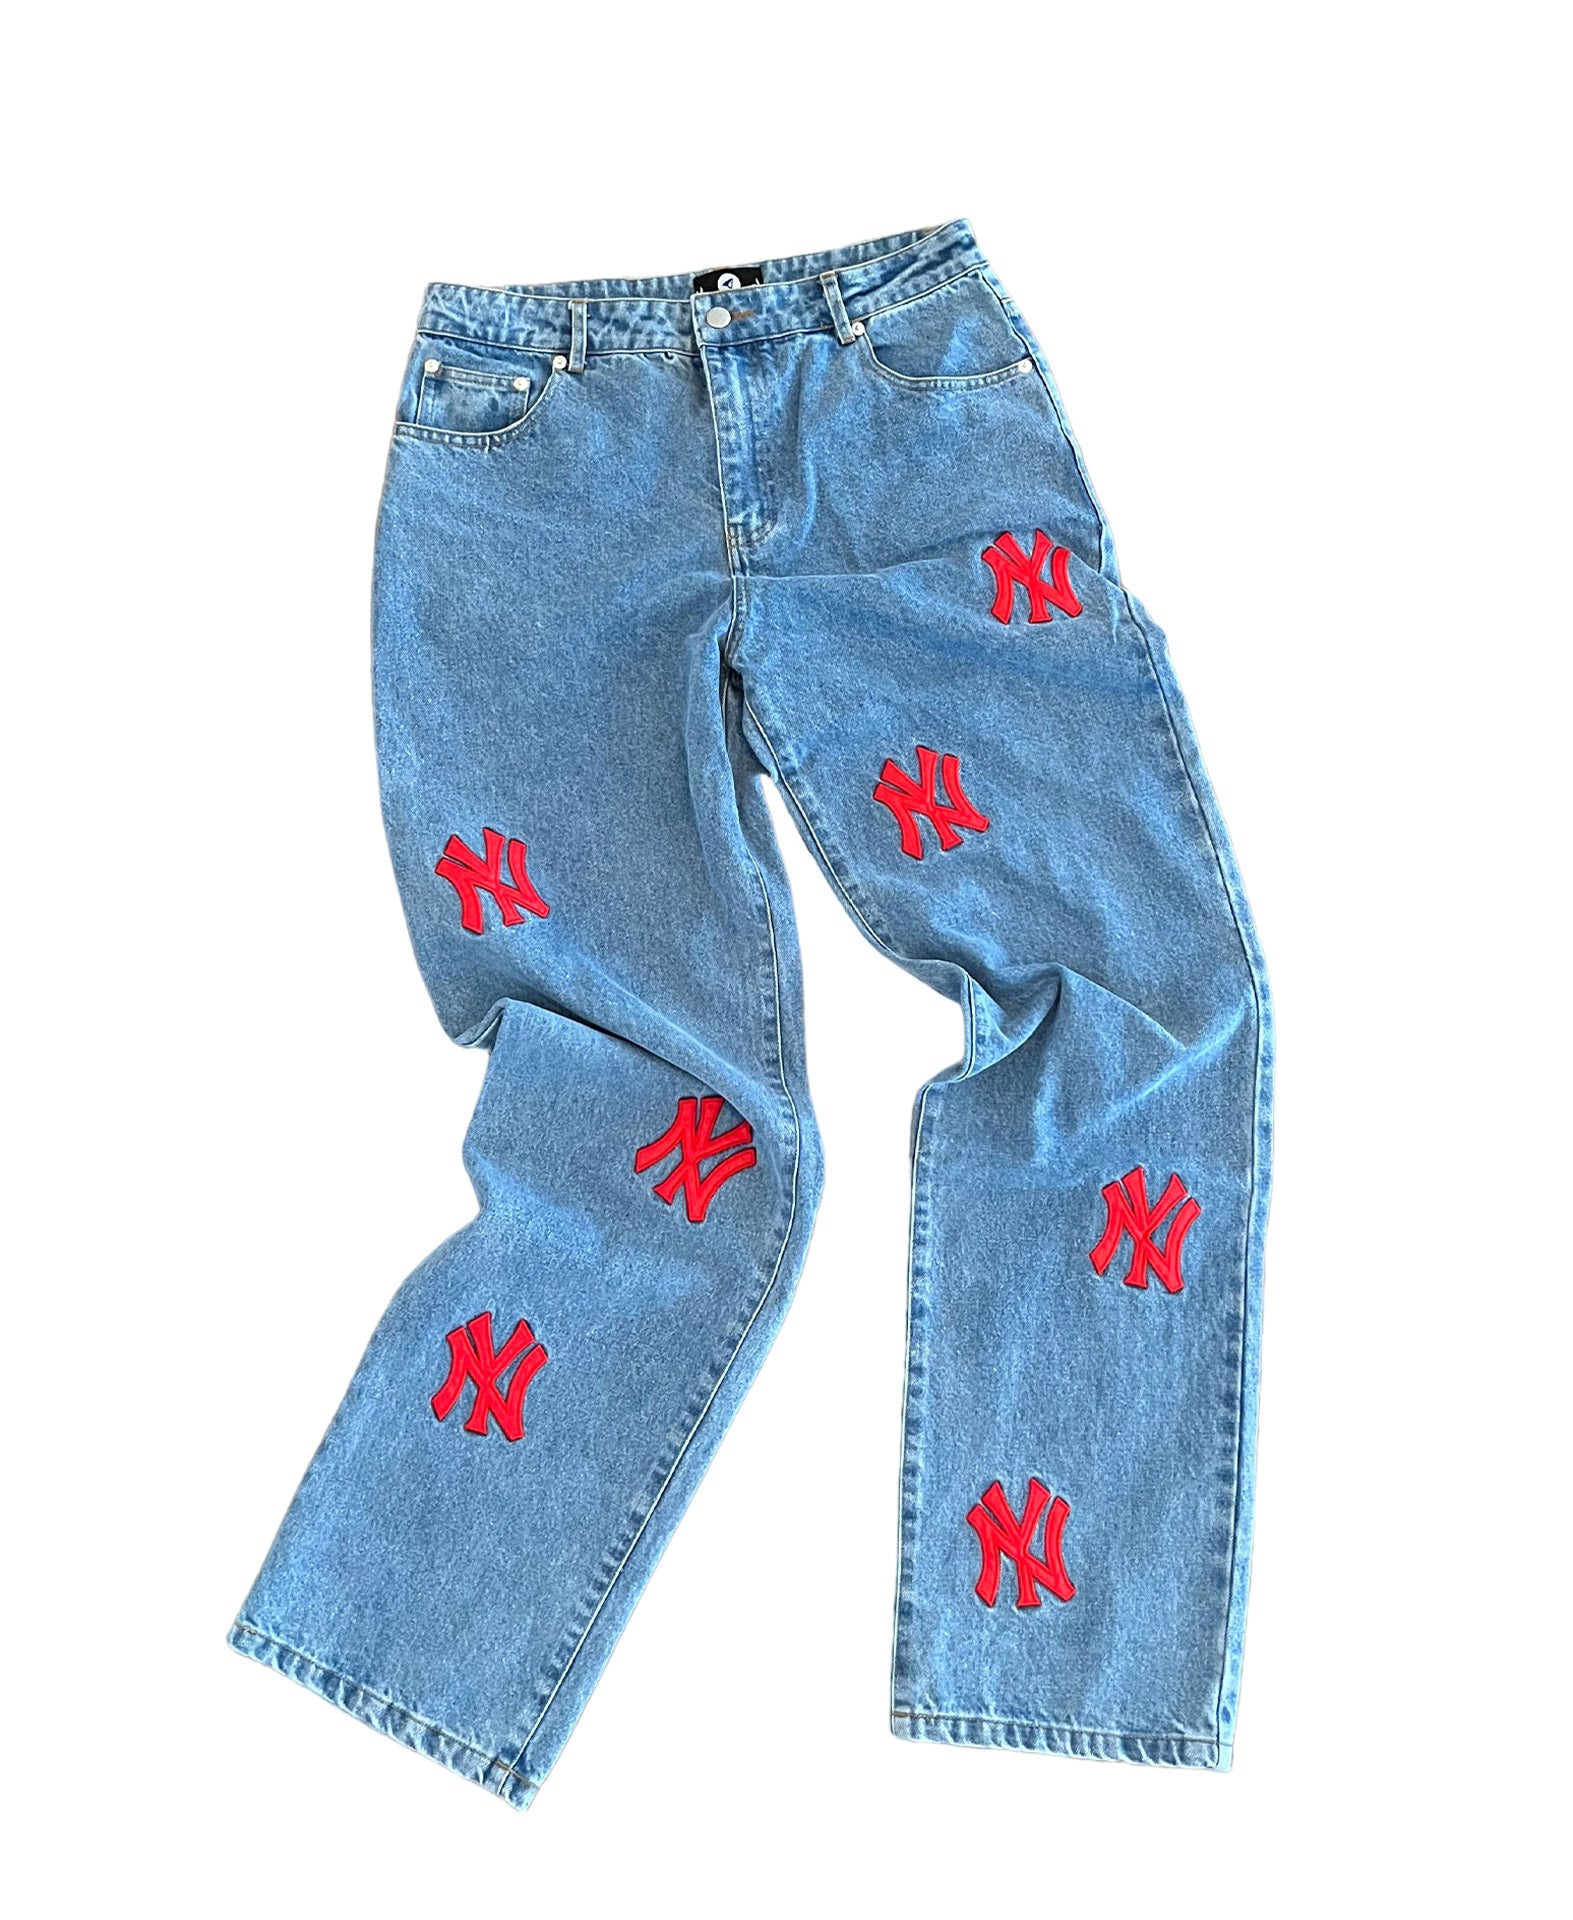 – York wash ABSTRACTBYJULES New Patch Blue Jeans -